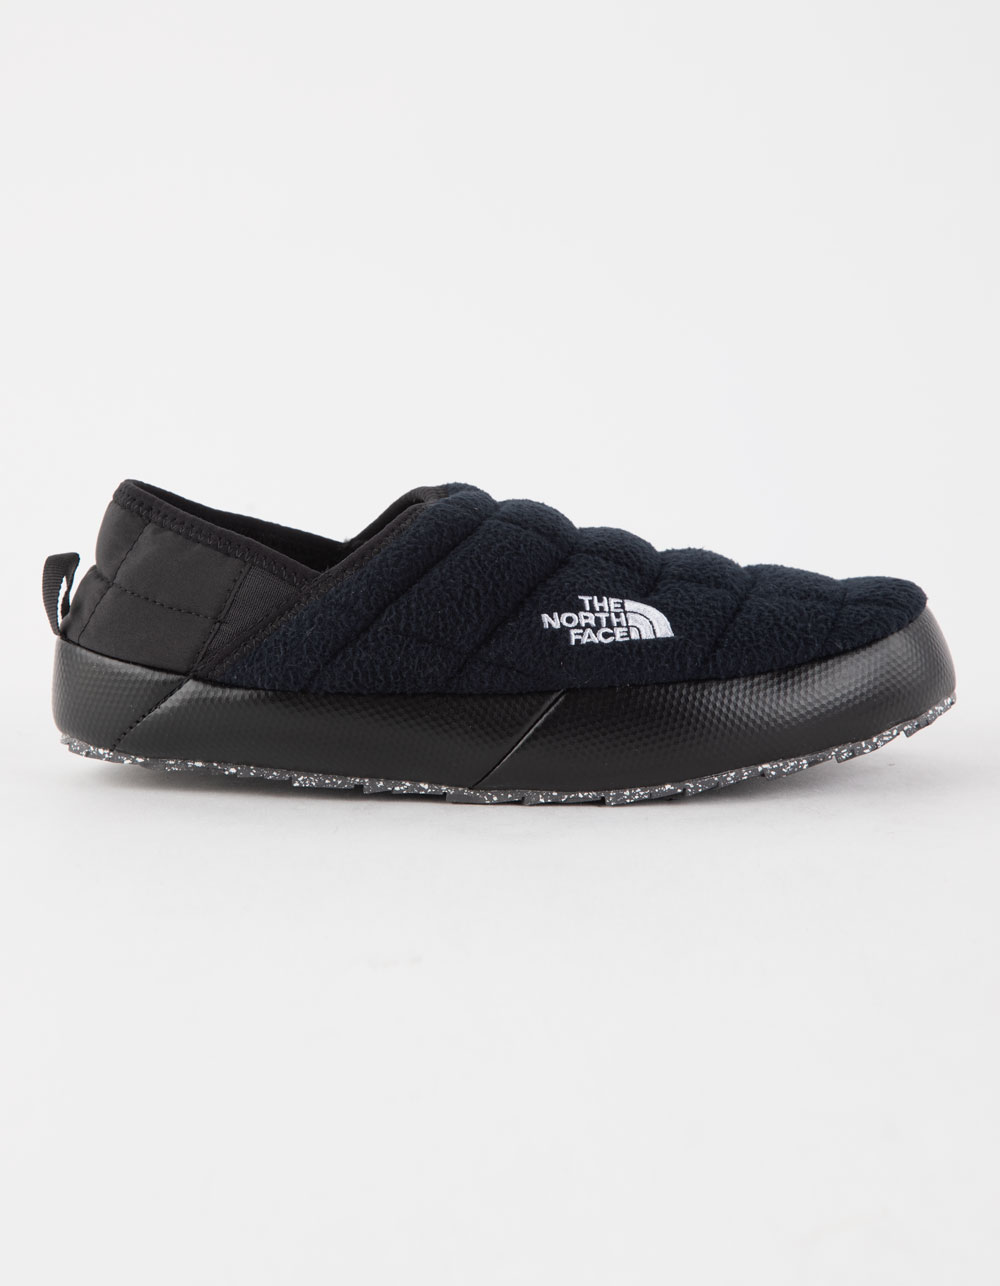 THE NORTH FACE™ Traction V Mules Mens Shoes - BLACK | Tillys